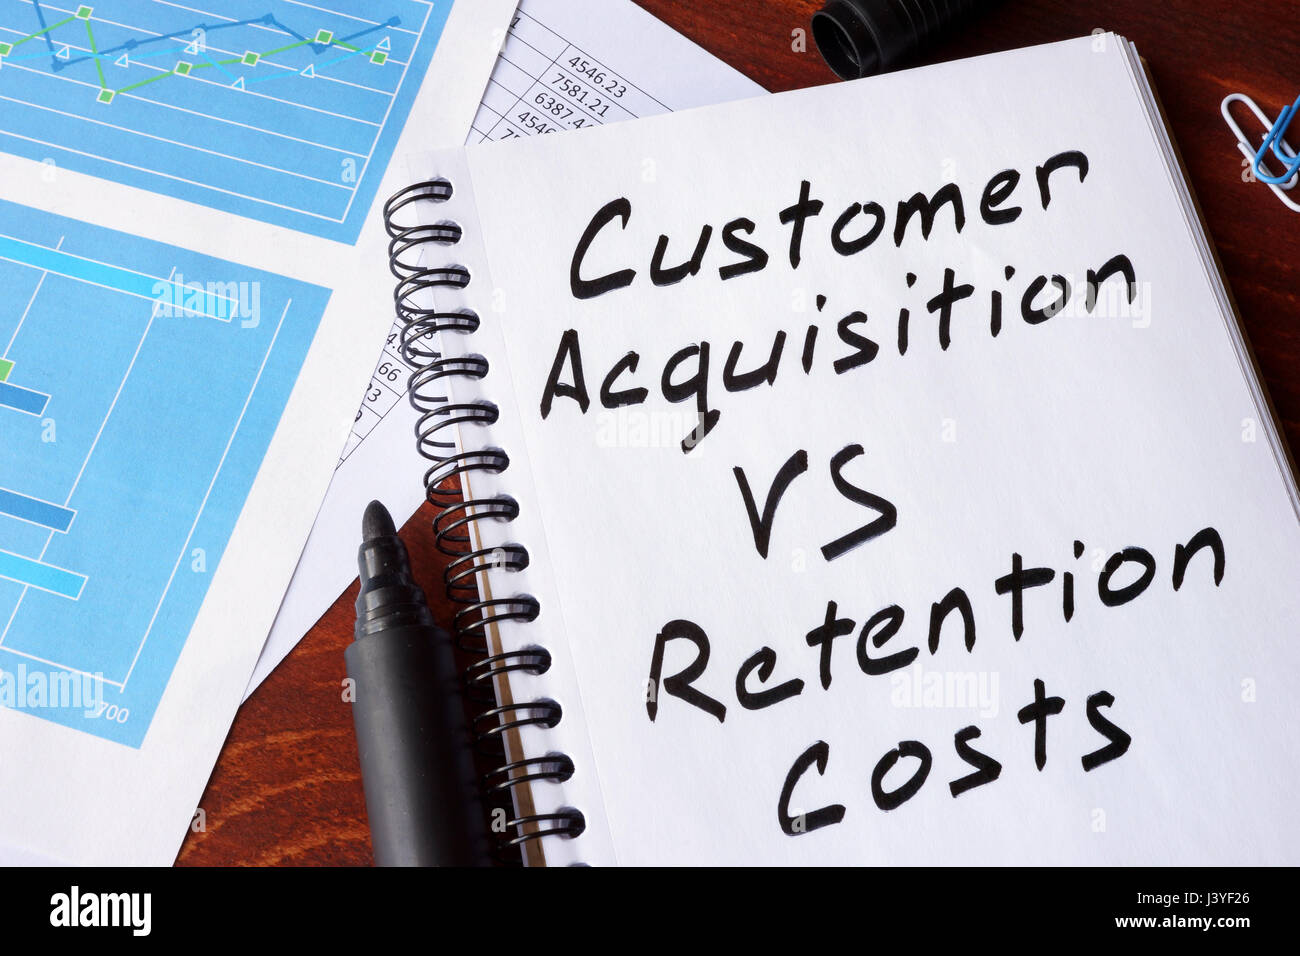 Customer Acquisition vs Retention Costs written in a note. Stock Photo